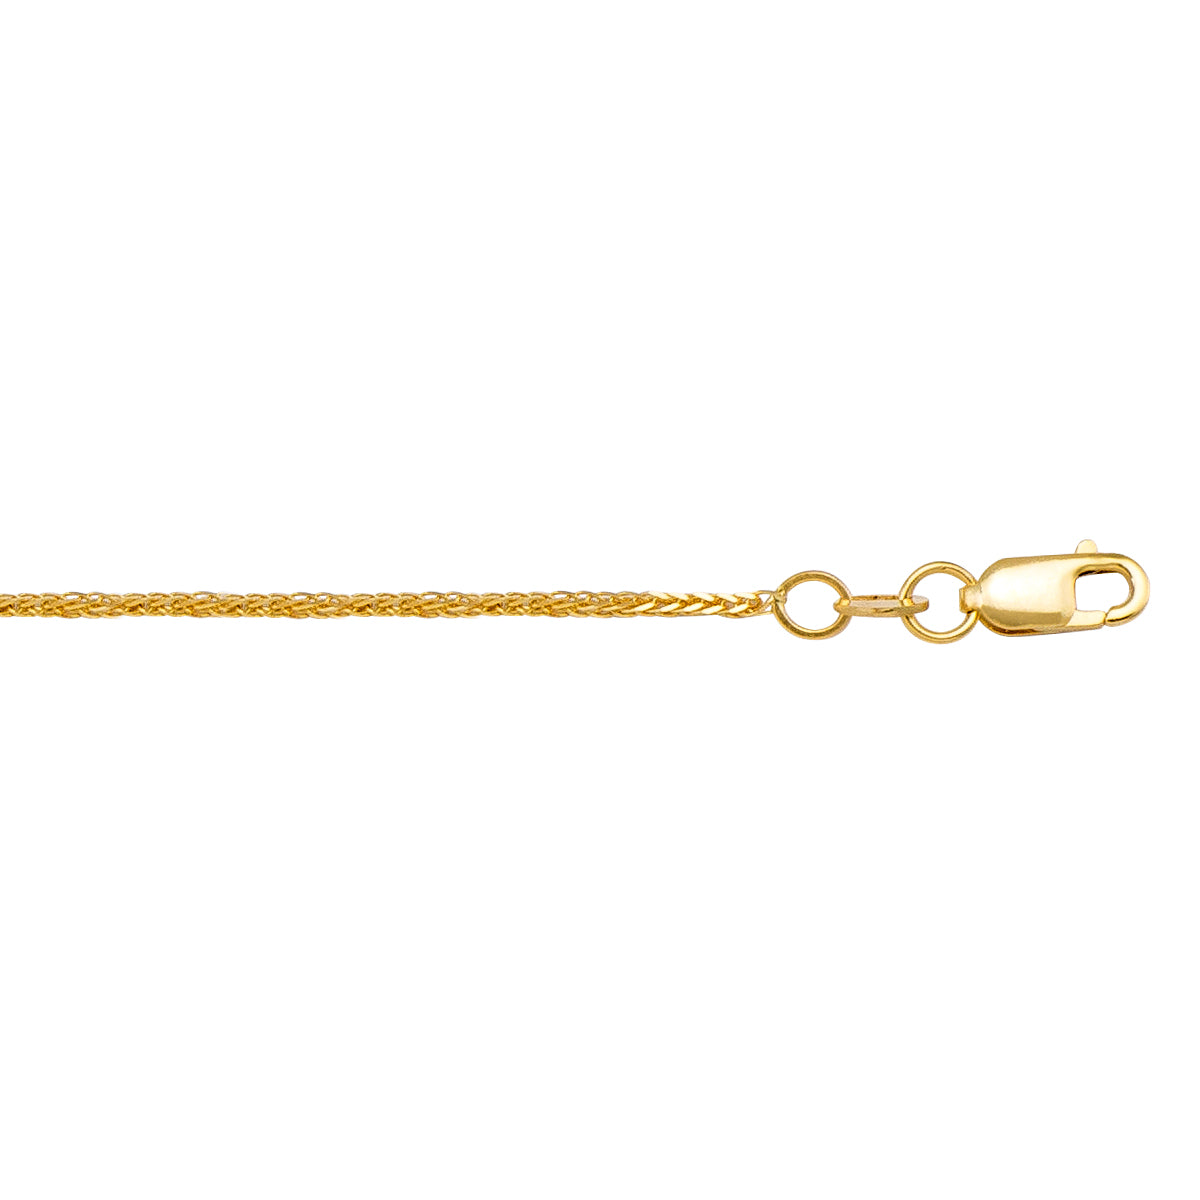 GOLD CHAIN YELLOW GOLD SOLID SQUARE WHEAT LINK 